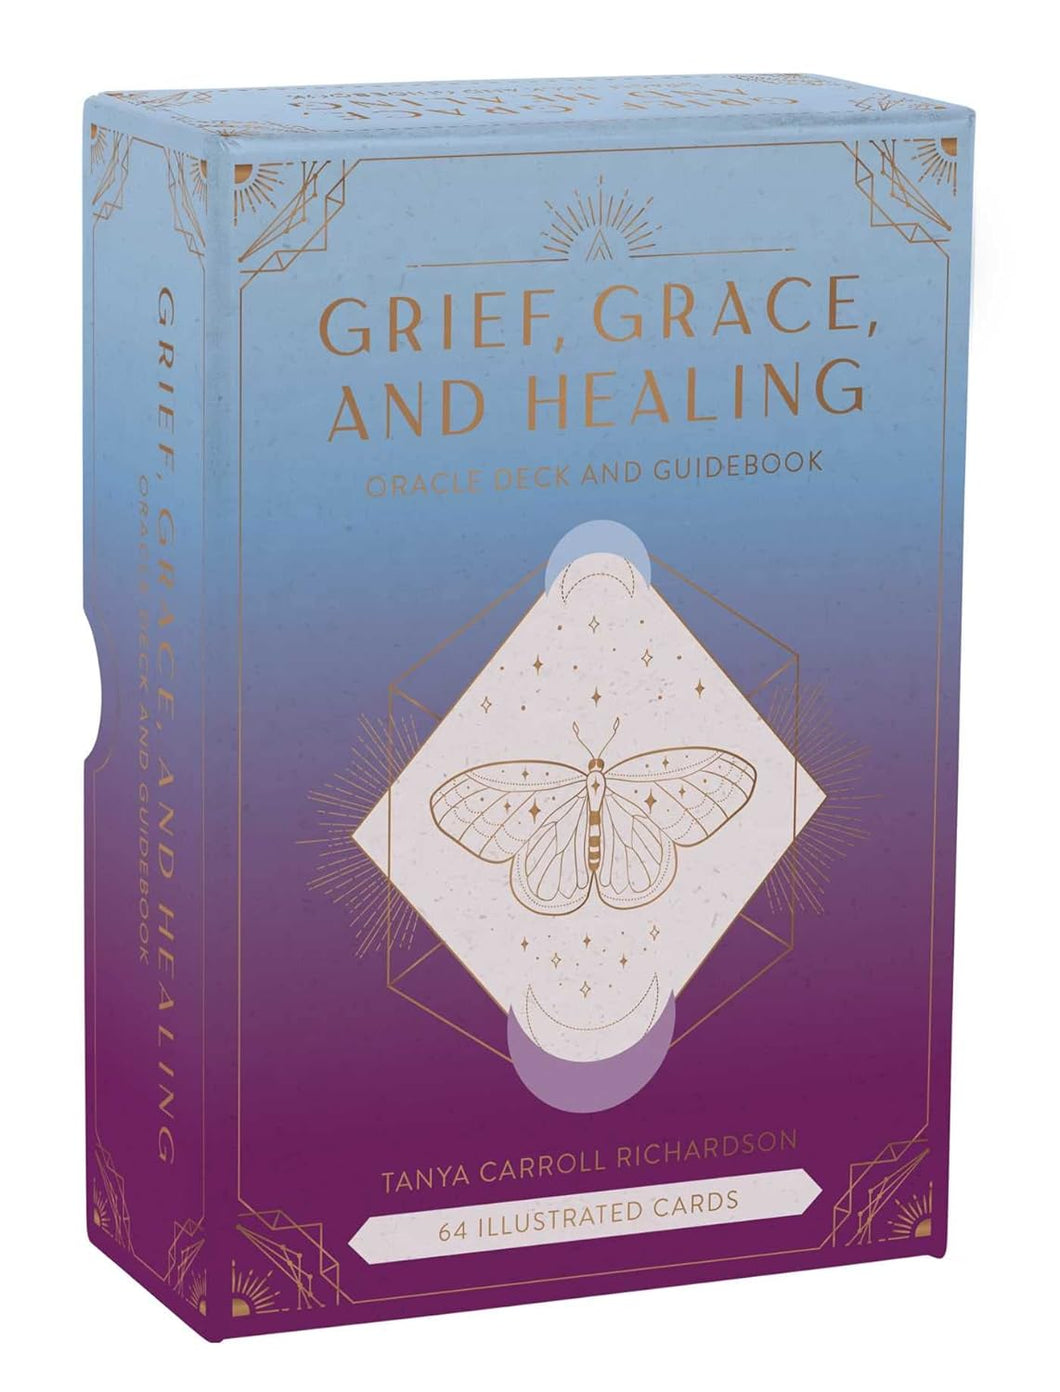 Grief, Grace, And Healing: Oracle Deck And Guidebook [Tanya Carroll Richardson]